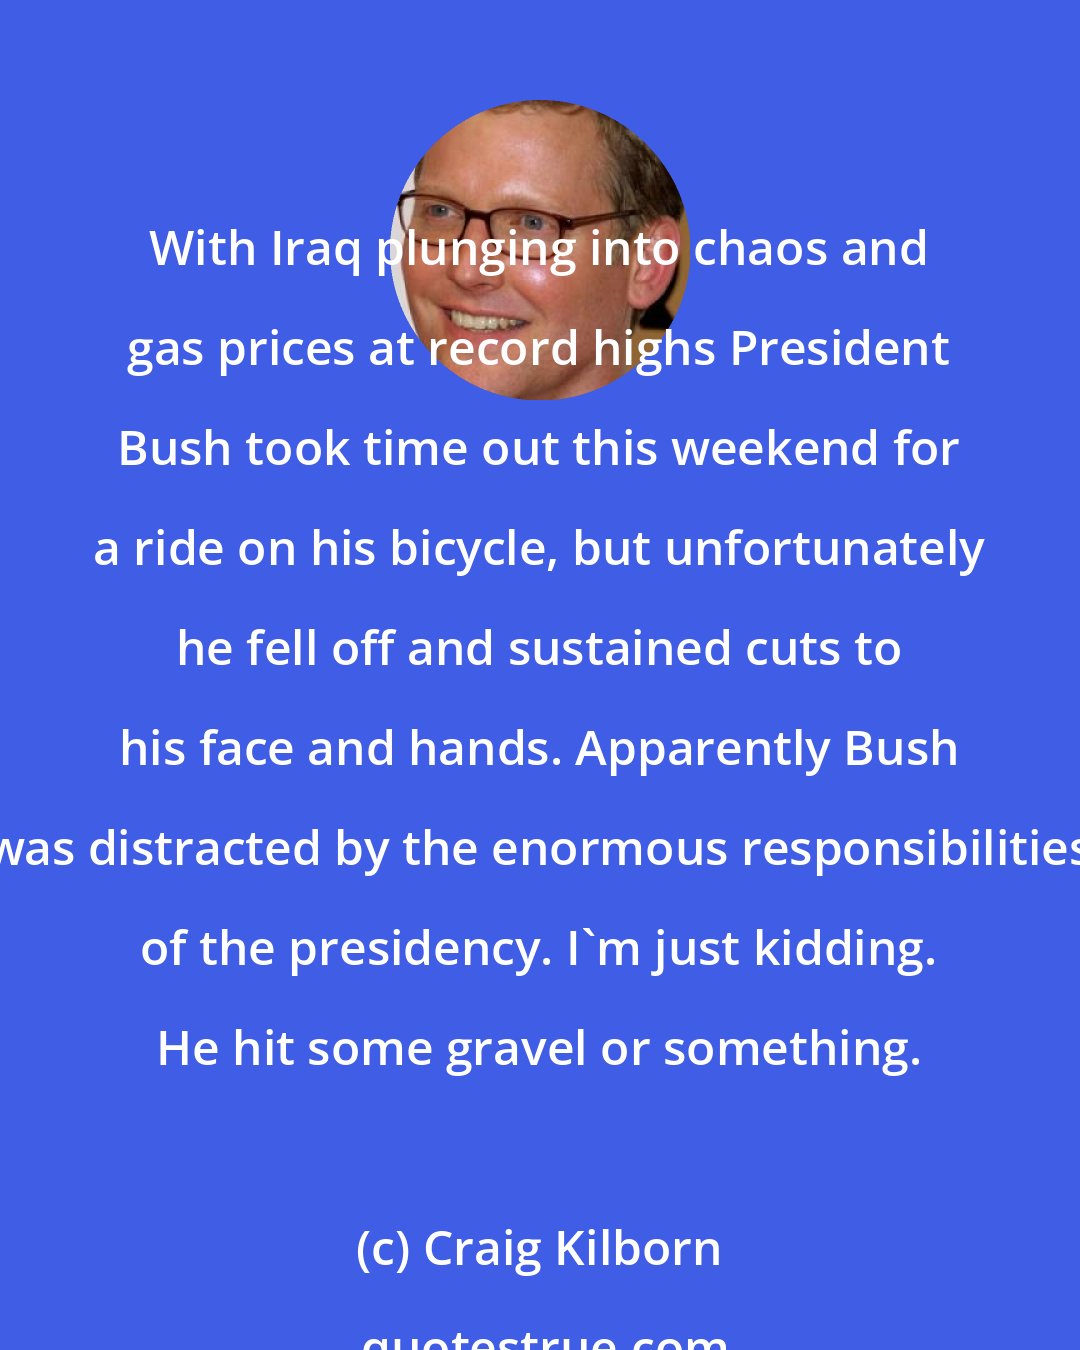 Craig Kilborn: With Iraq plunging into chaos and gas prices at record highs President Bush took time out this weekend for a ride on his bicycle, but unfortunately he fell off and sustained cuts to his face and hands. Apparently Bush was distracted by the enormous responsibilities of the presidency. I'm just kidding. He hit some gravel or something.